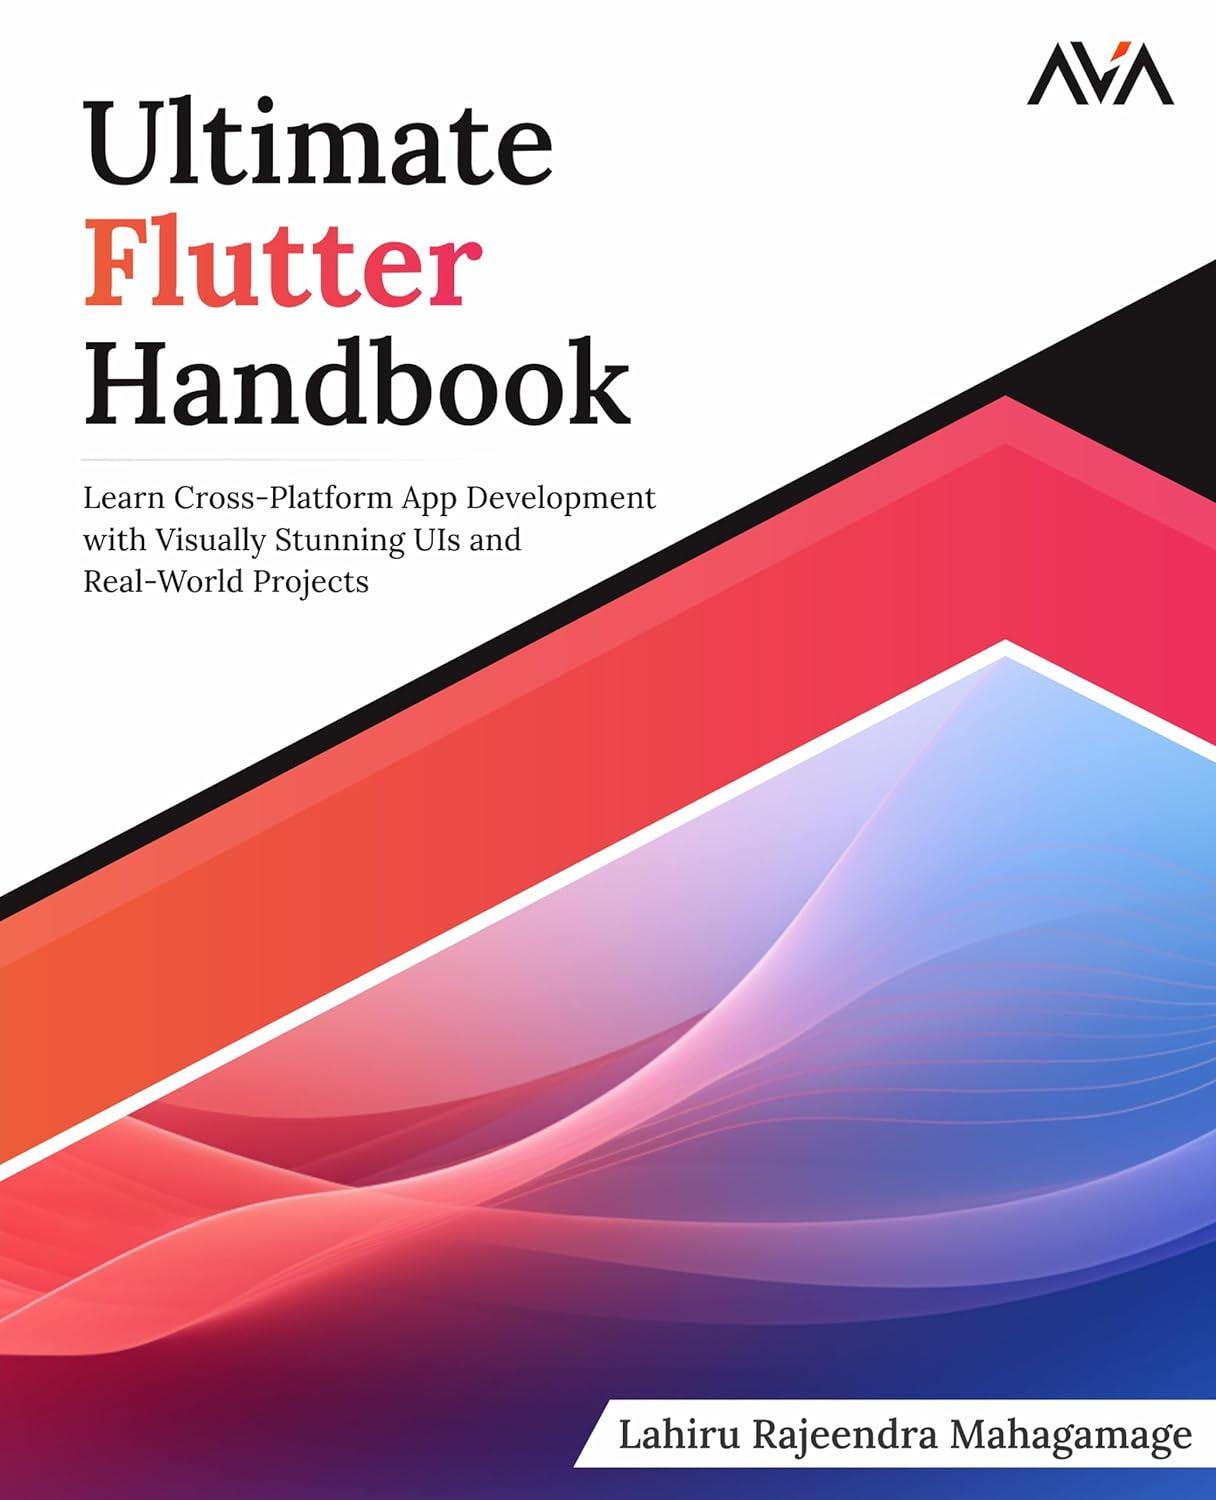 Ultimate Flutter Handbook: Learn Cross-Platform App Development with Visually Stunning UIs and Real-World Projects